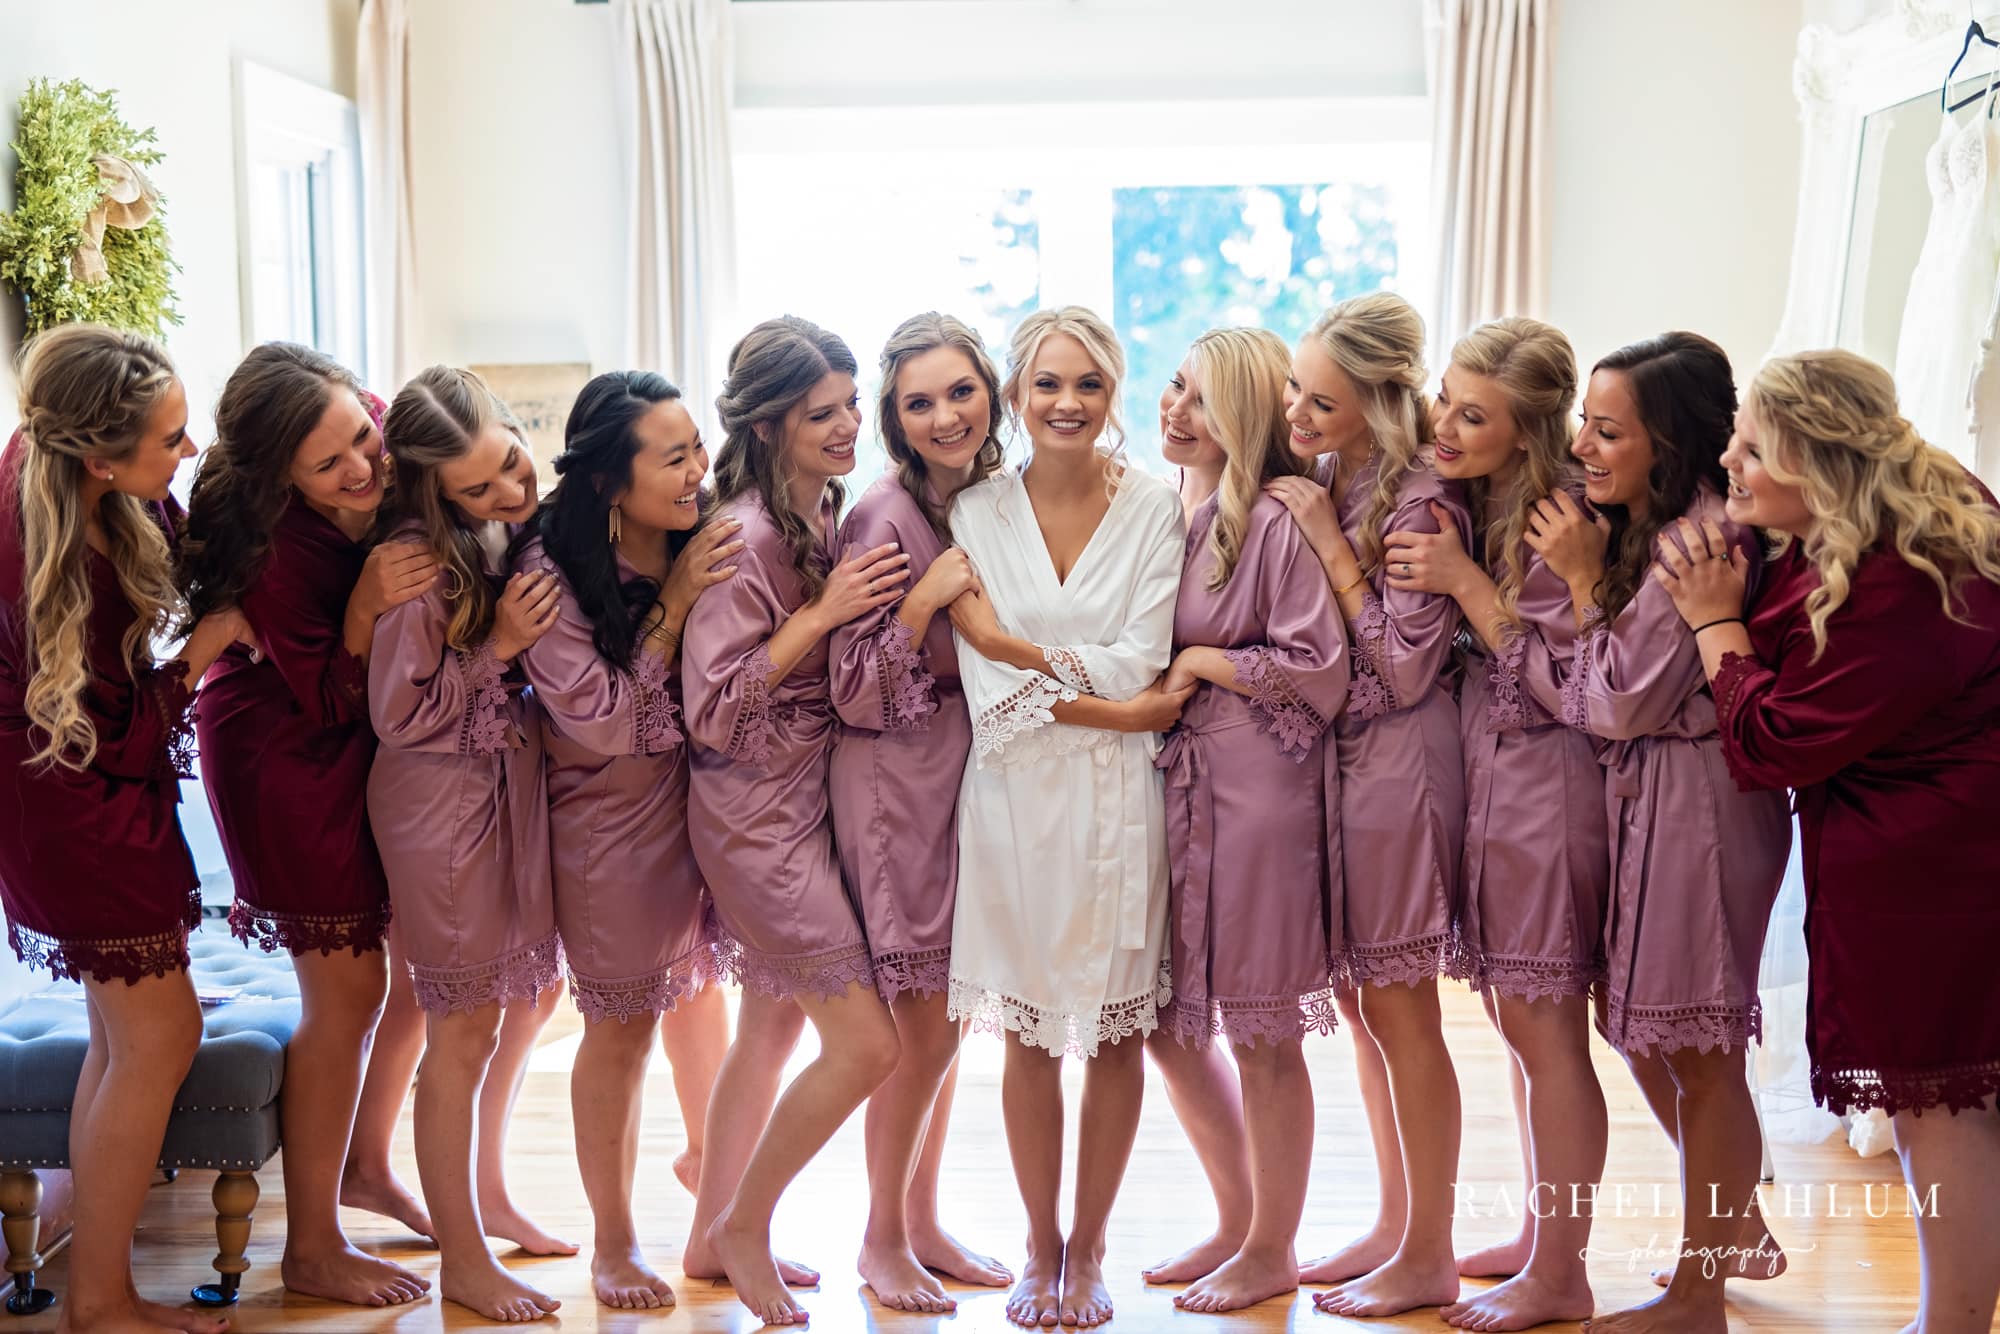 Bride stands in center surrounded by her bridesmaids at The Cottage Farmhouse in Glencoe, Minnesota.